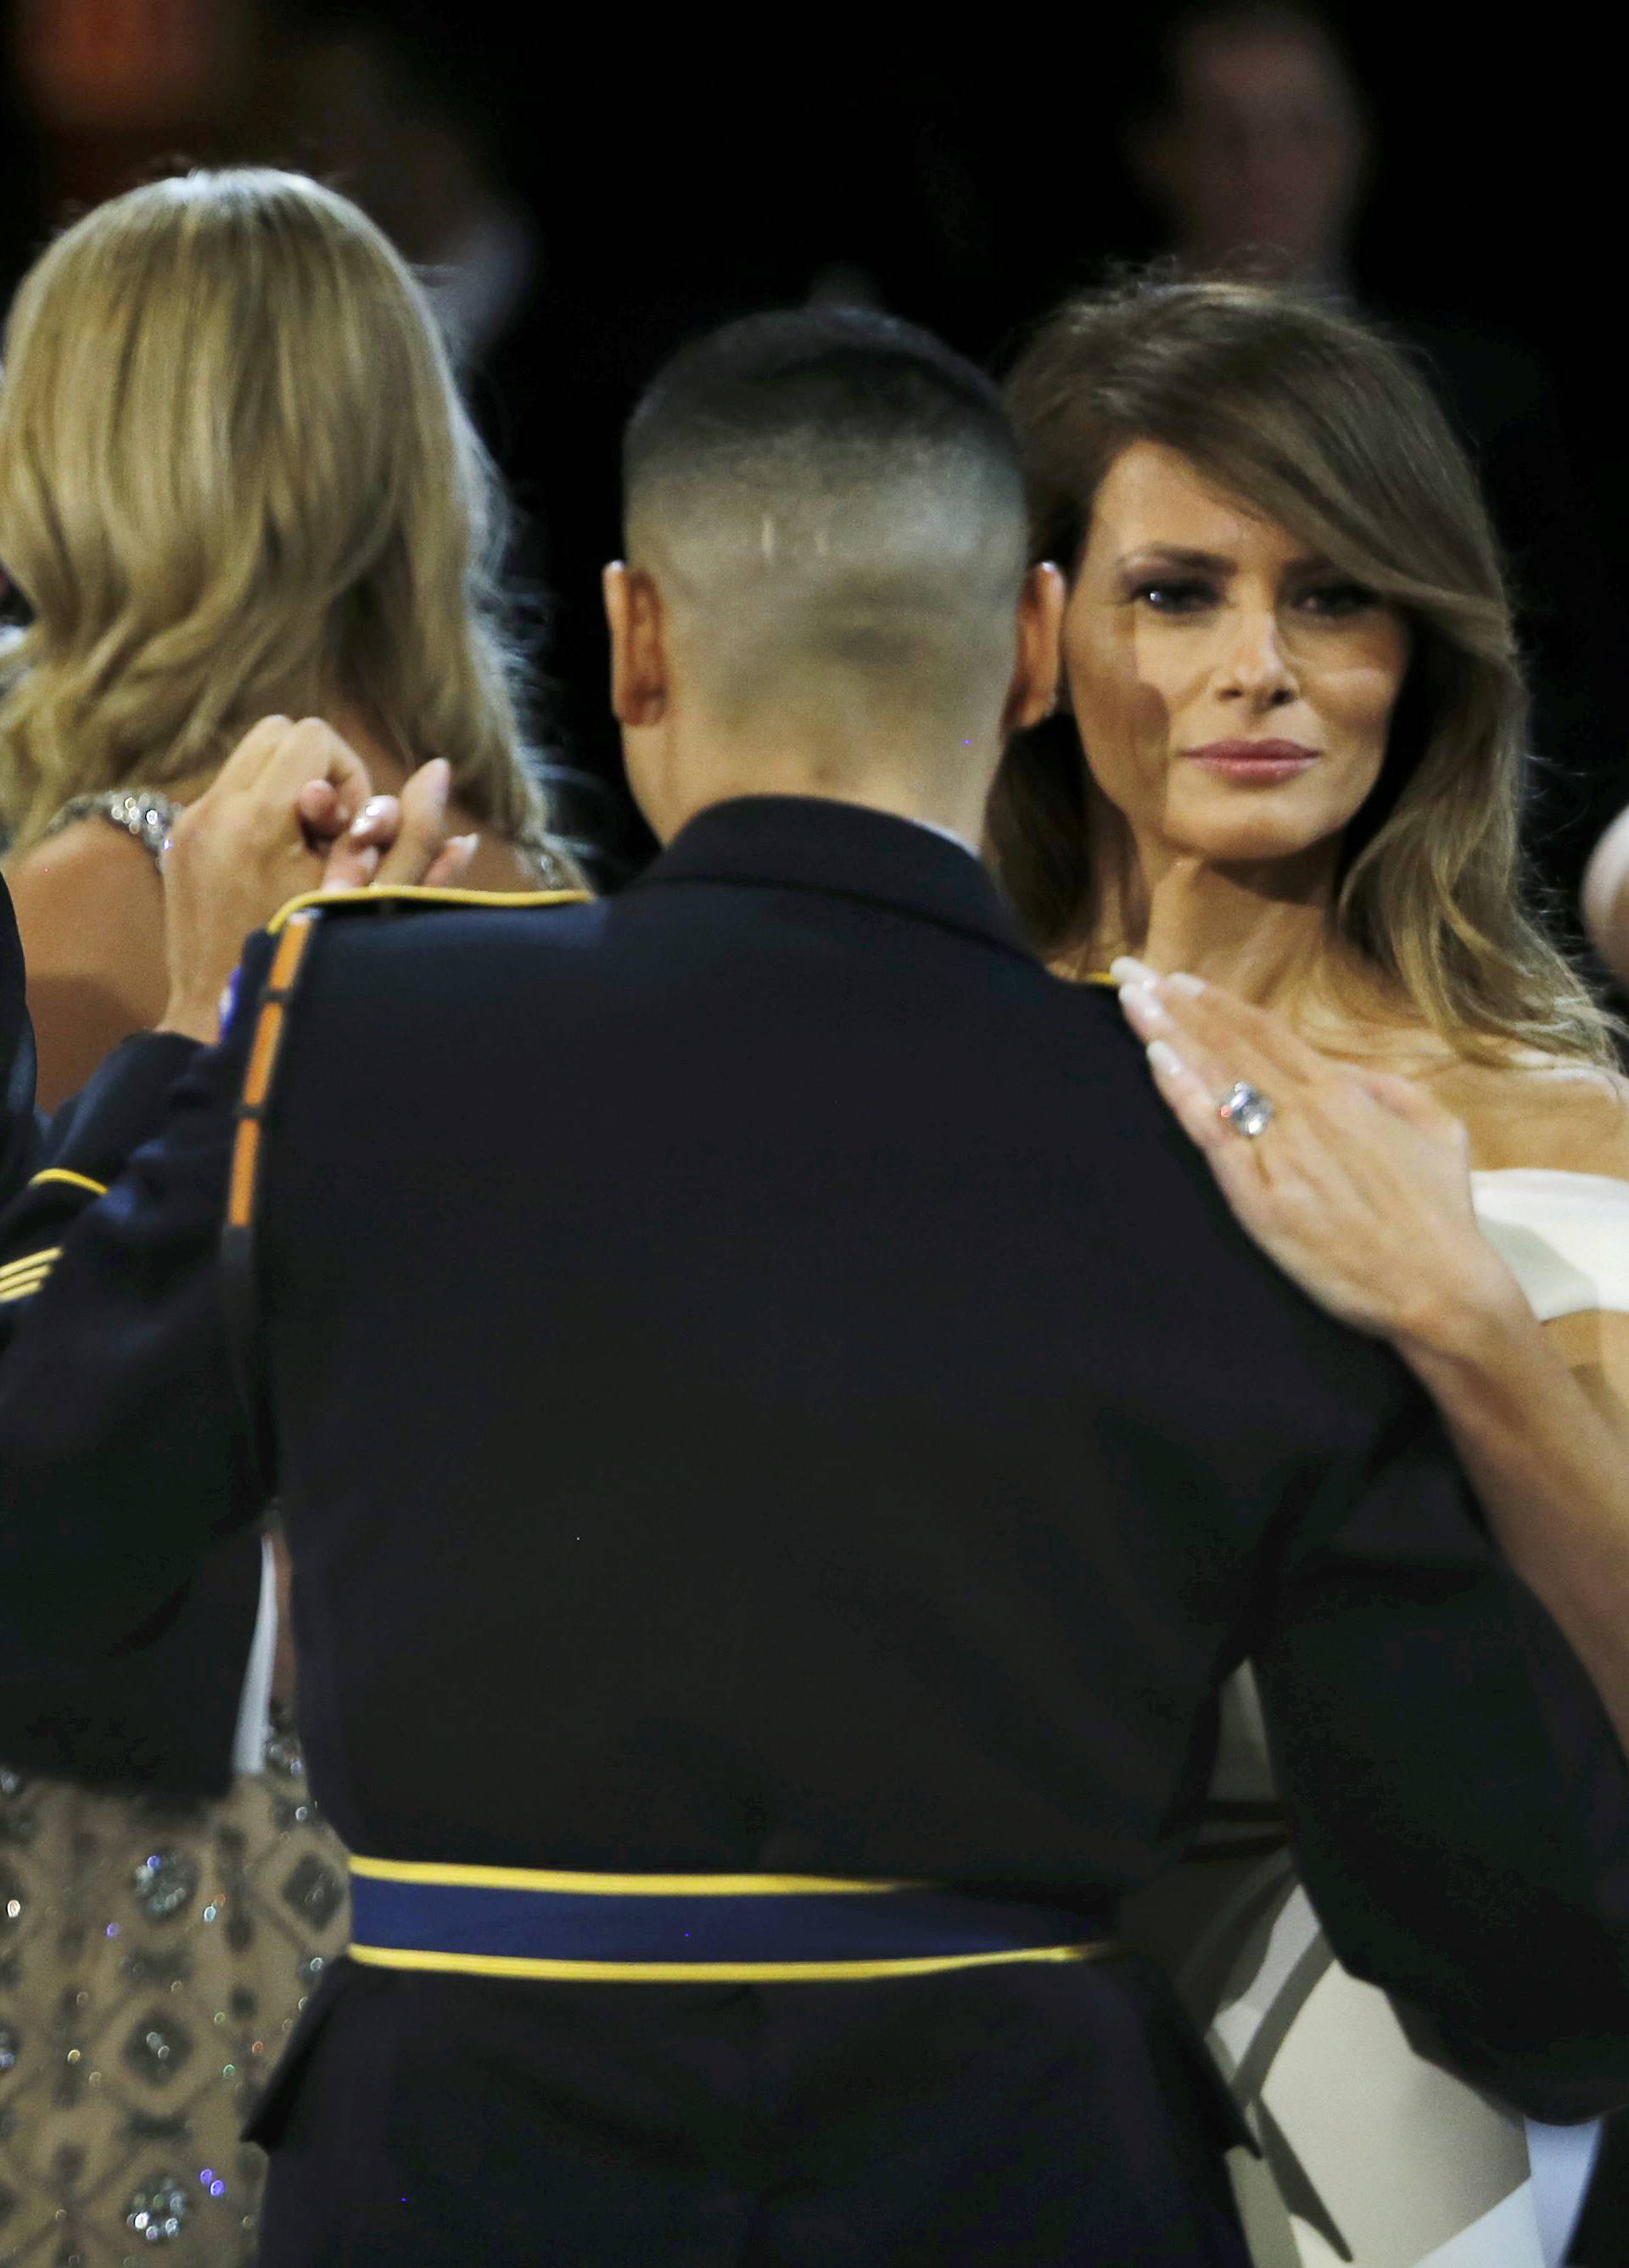 U.S. Navy Petty Officer Second Class Catherine Cartmell dances with President Trump as United States Army Staff Sergeant Jose A. Medina dances with First Lady Melania Trump during the Salute to Our Armed Services Ball in Washington